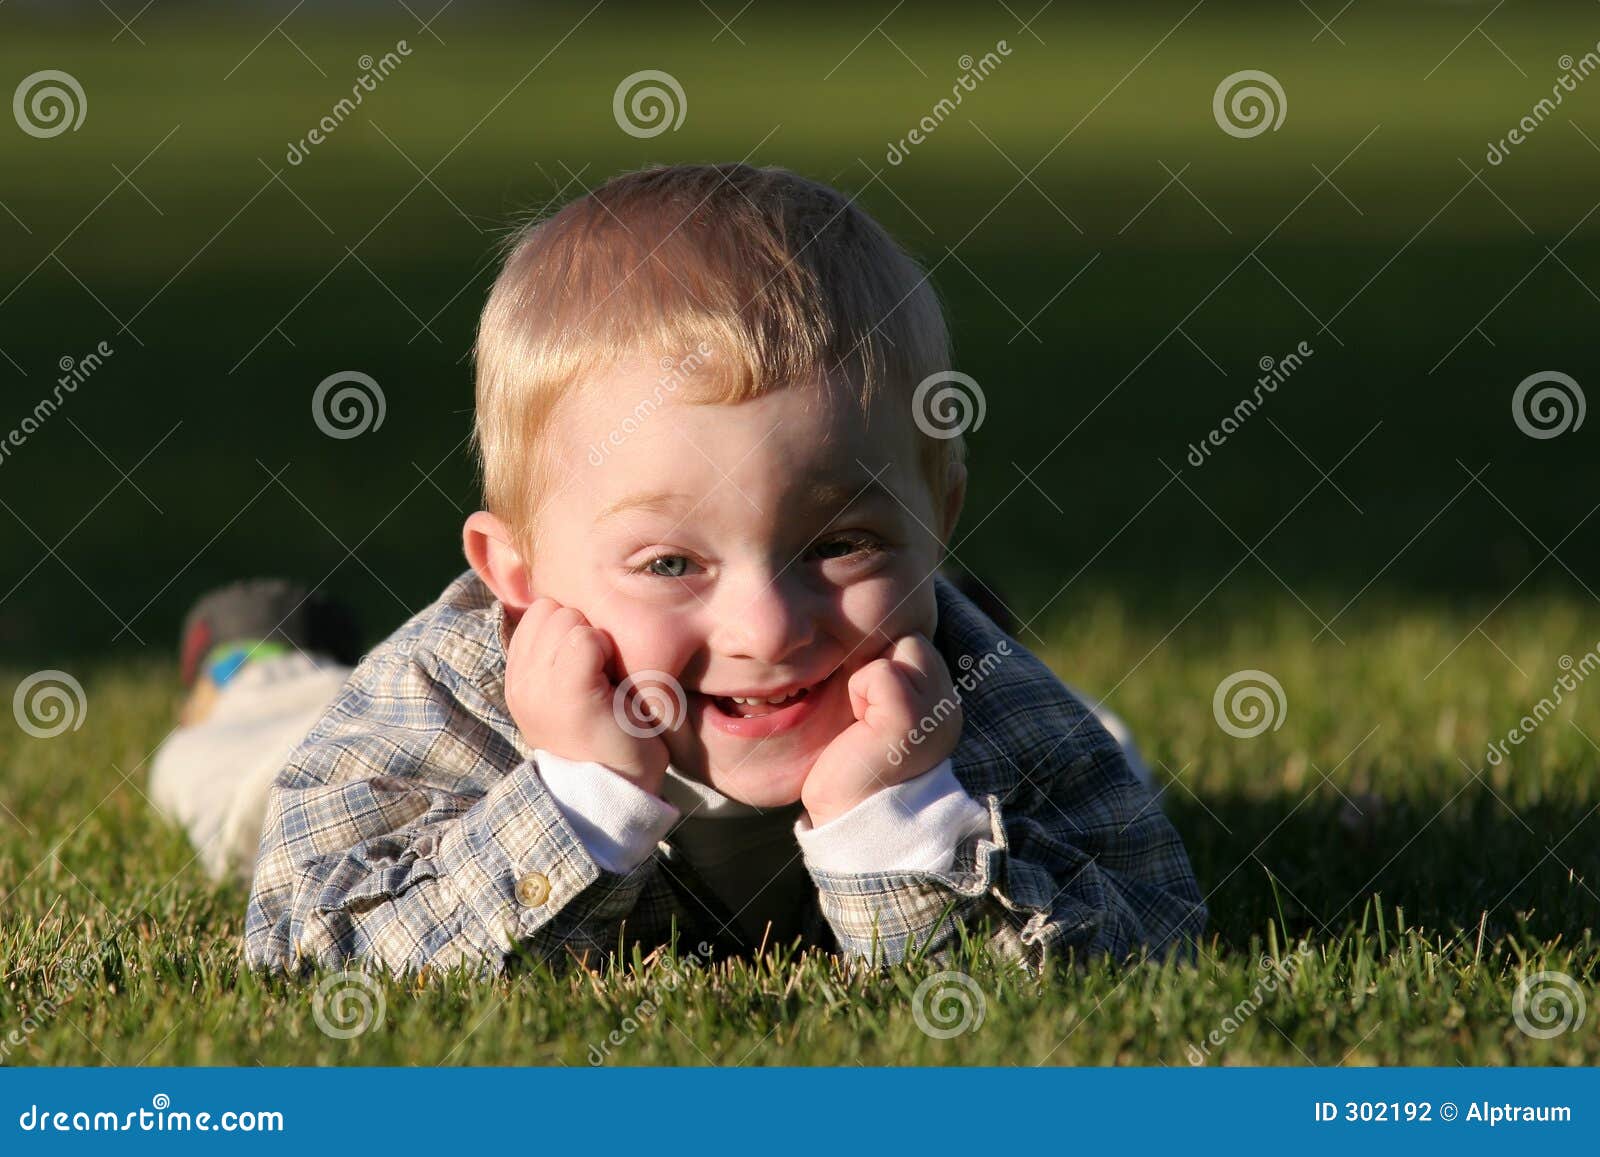 cute young boy with cheeky grin